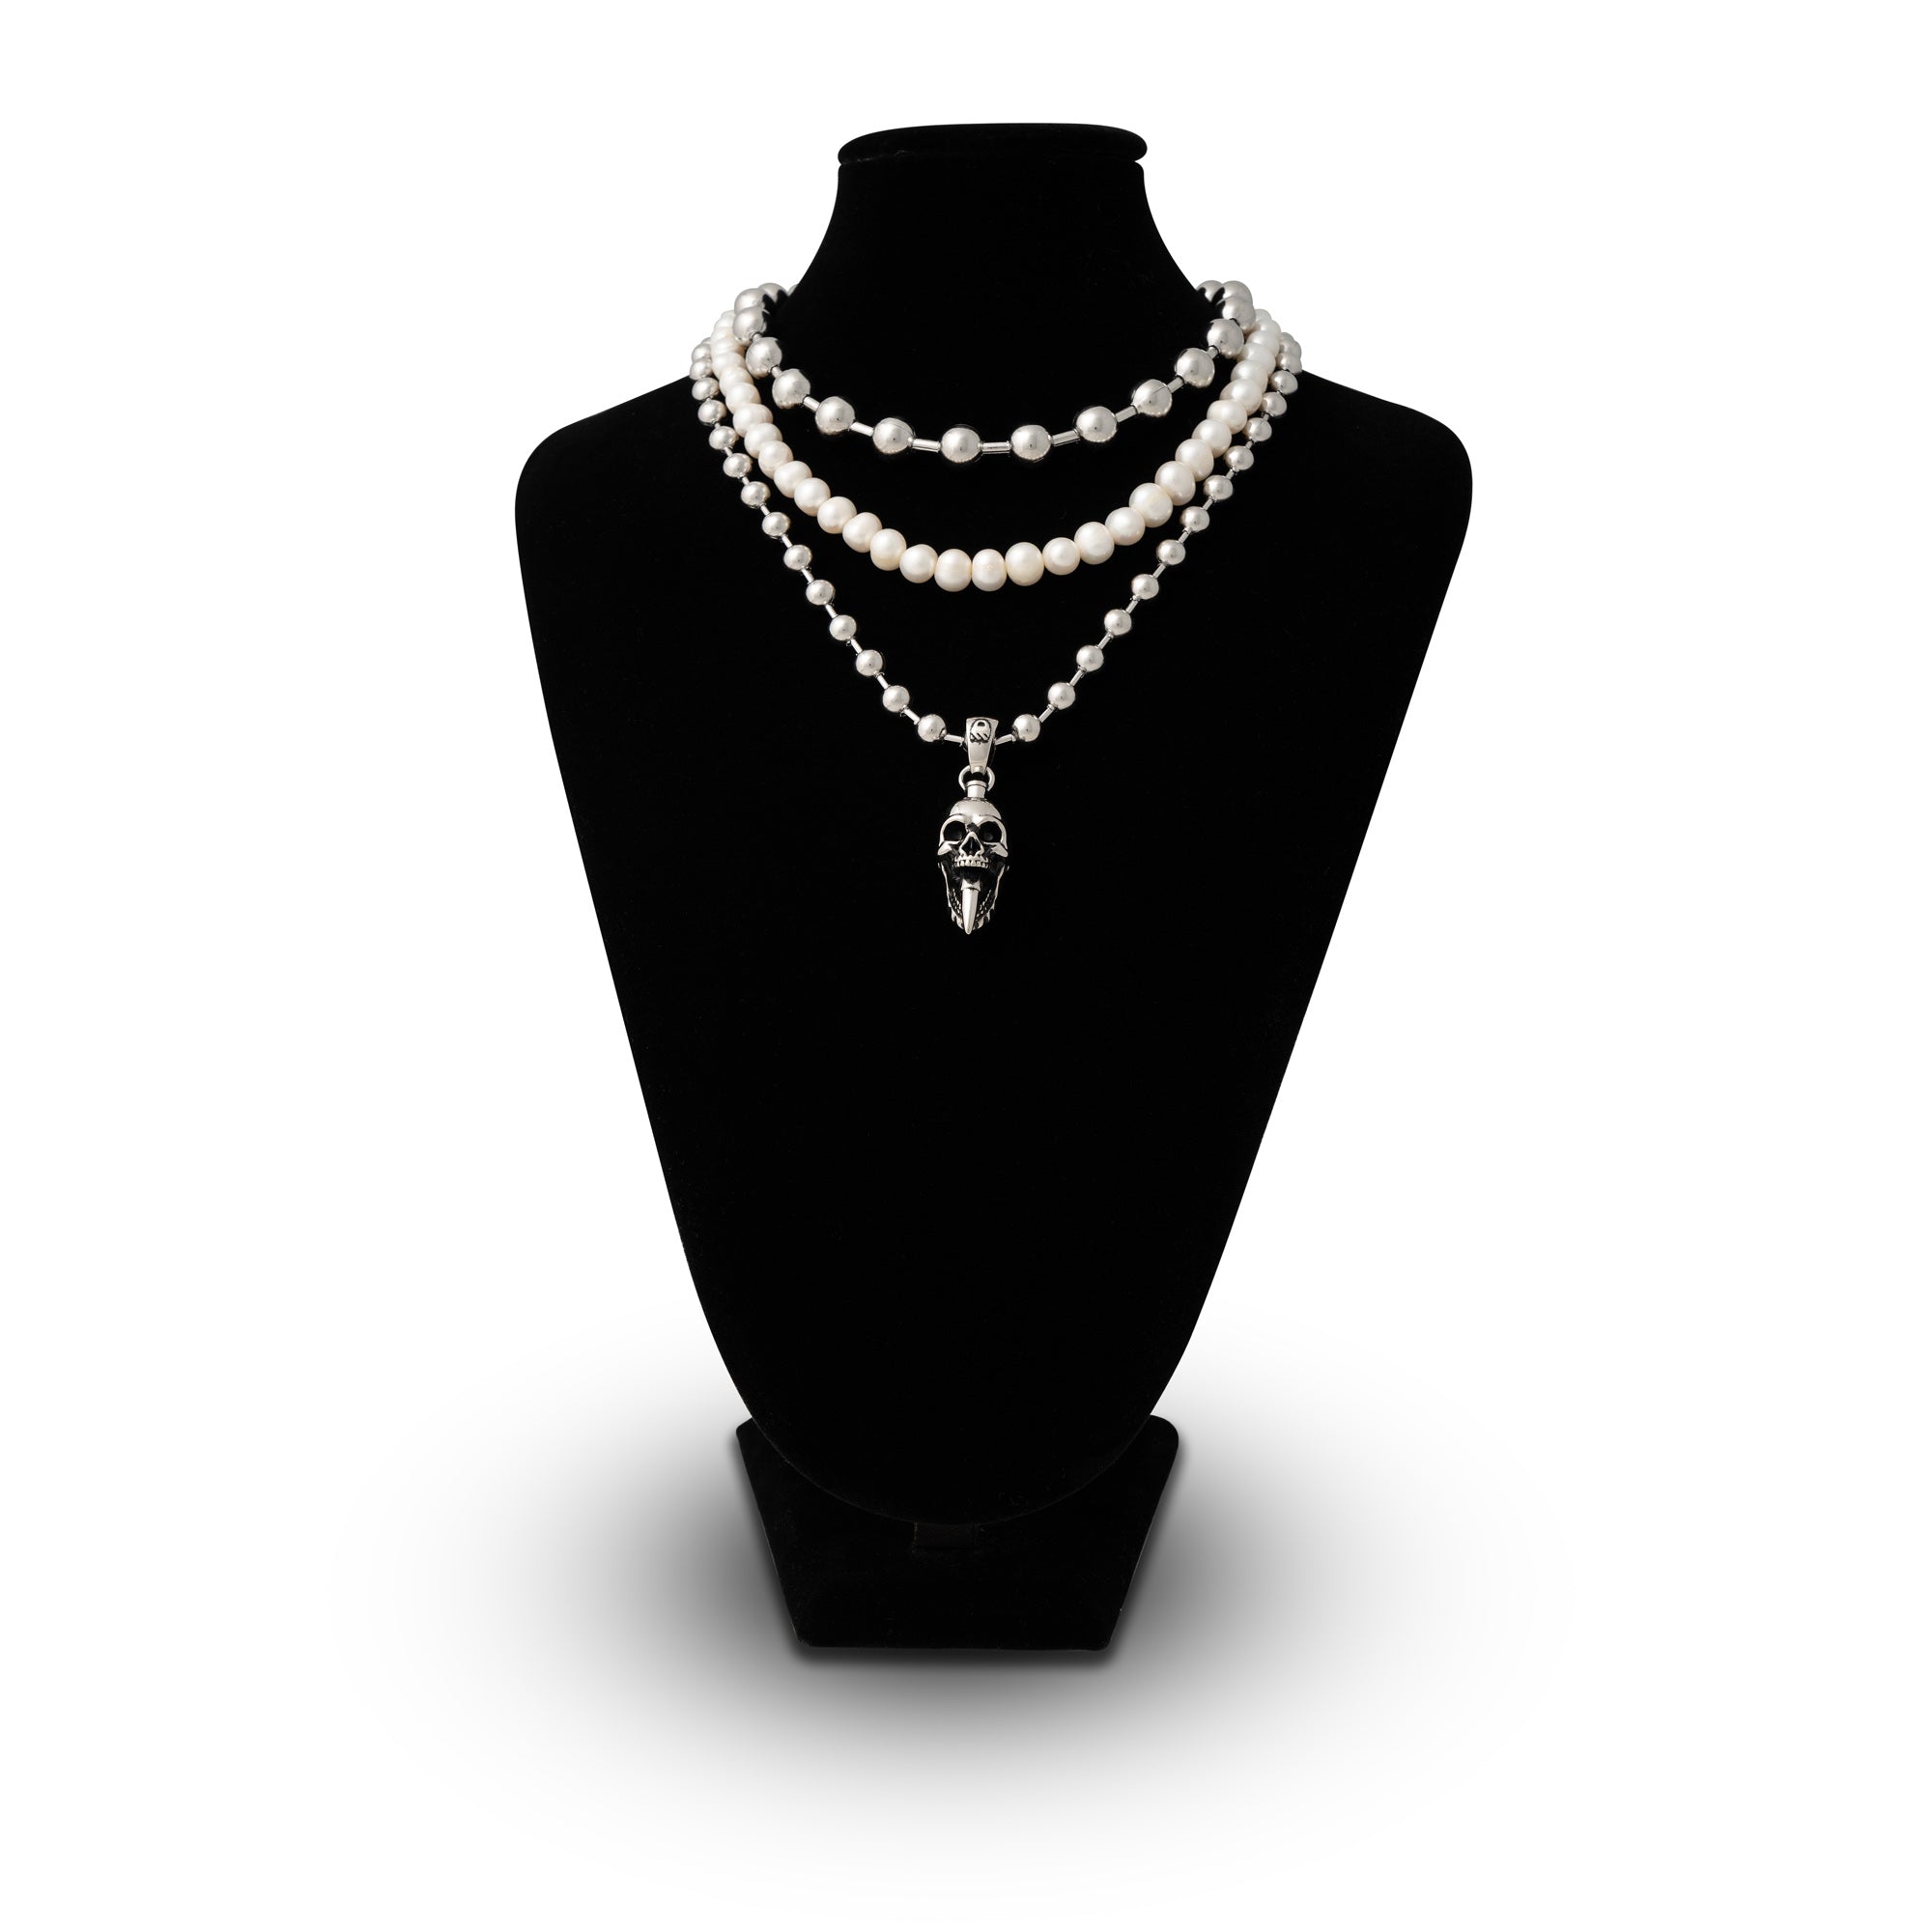 Gothic silver necklace set with skull jewelry and pearls by Statement Collective